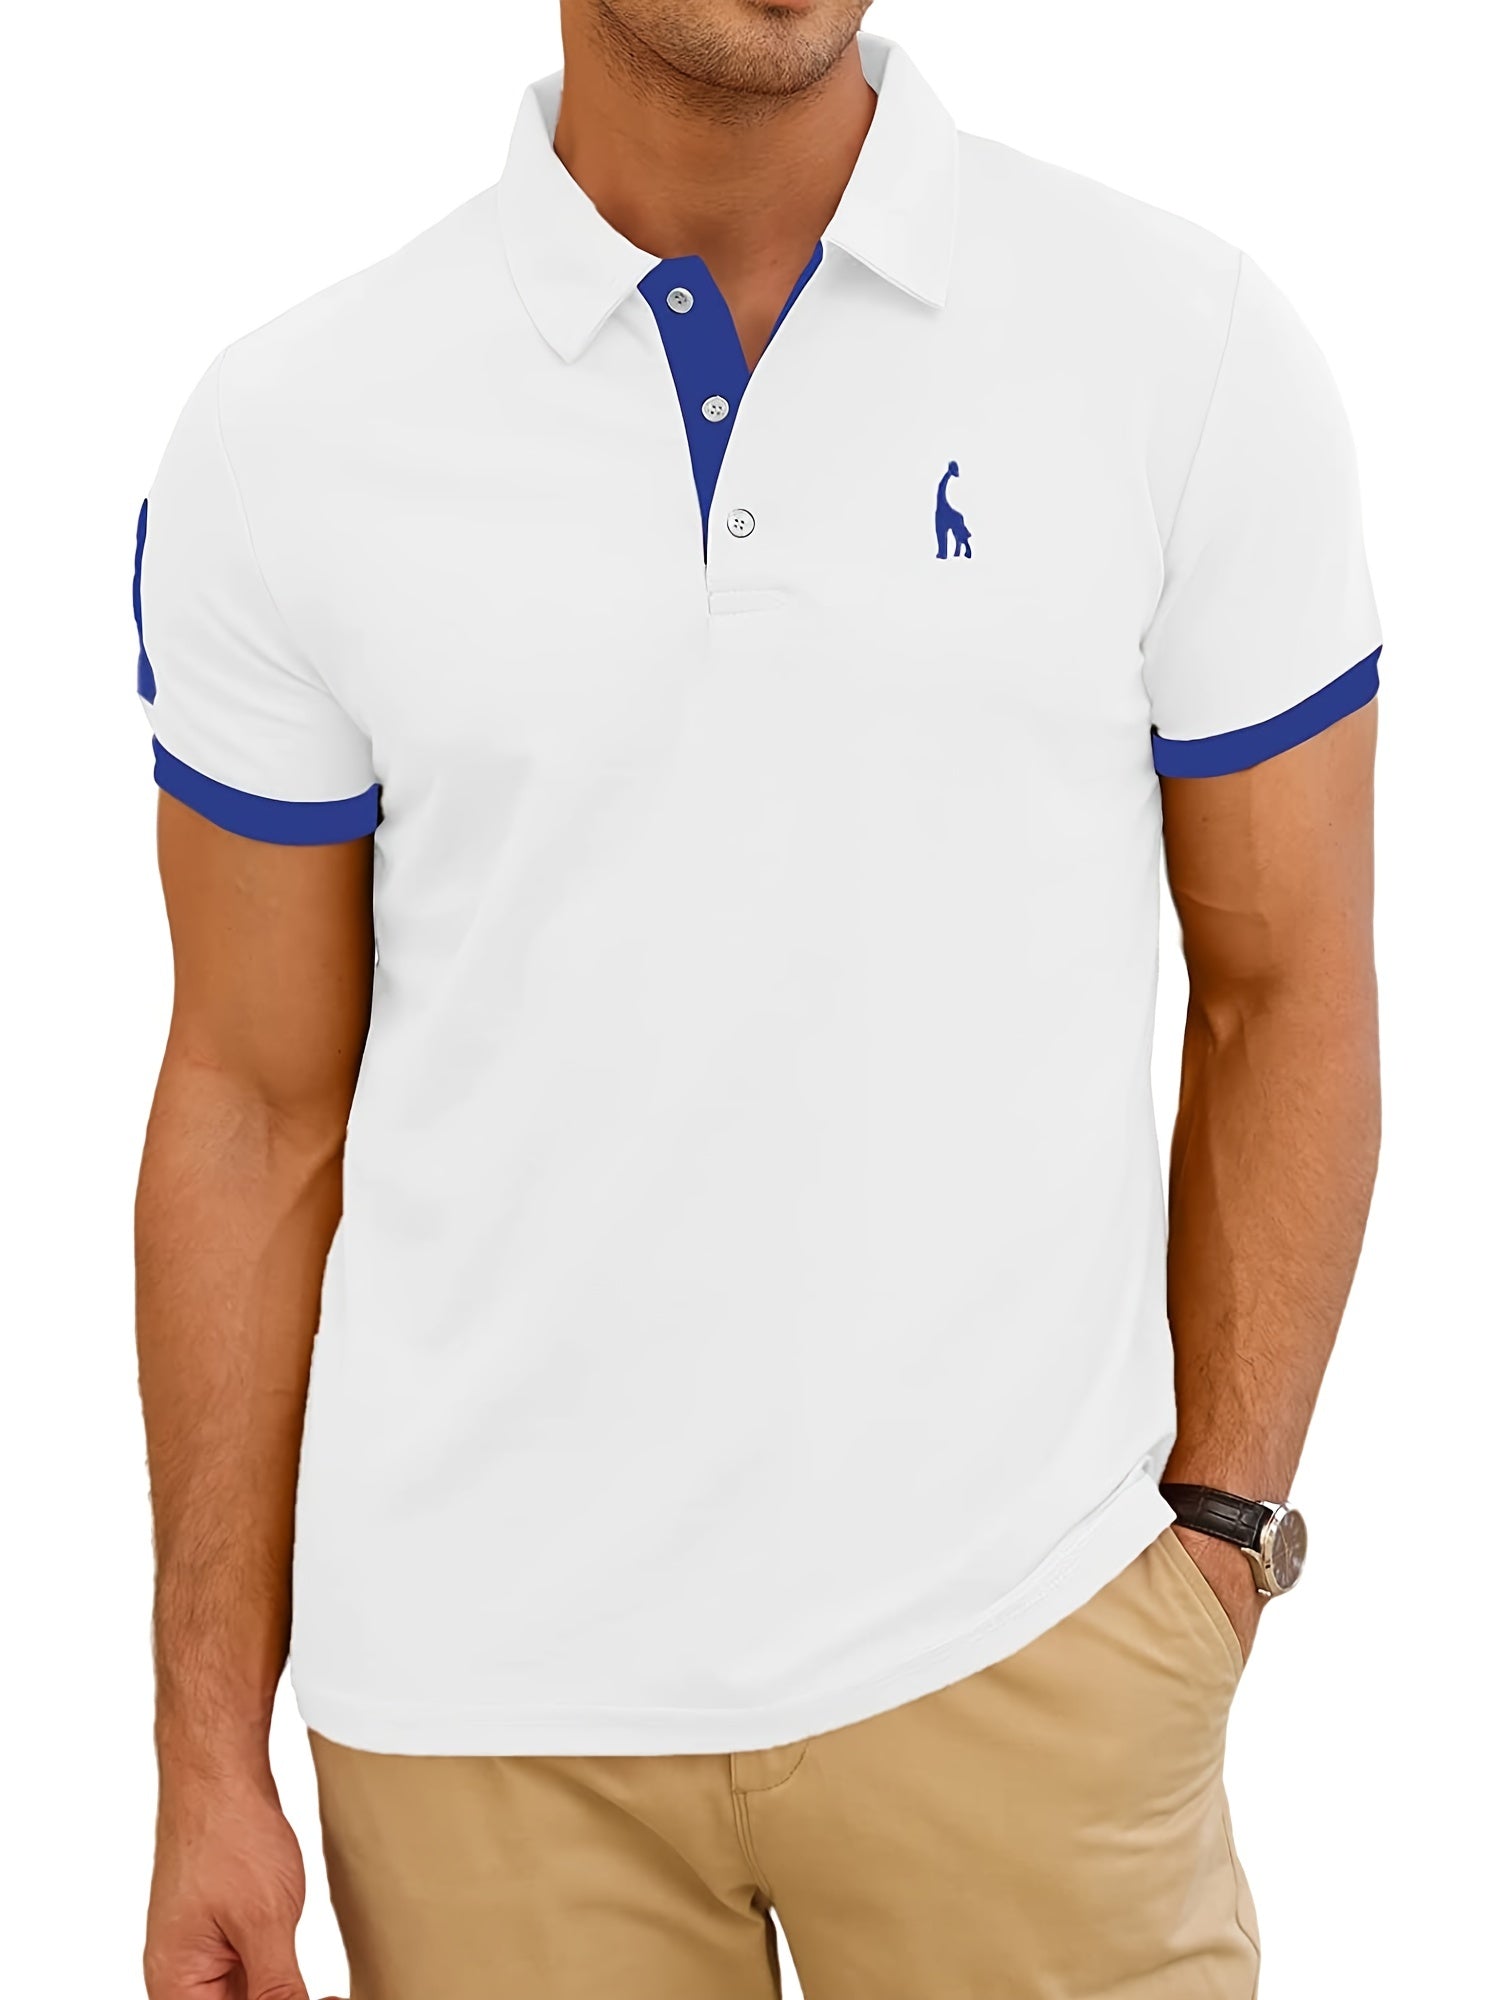 Men's Casual Slim Fit Embroidered Striped Polo Shirt